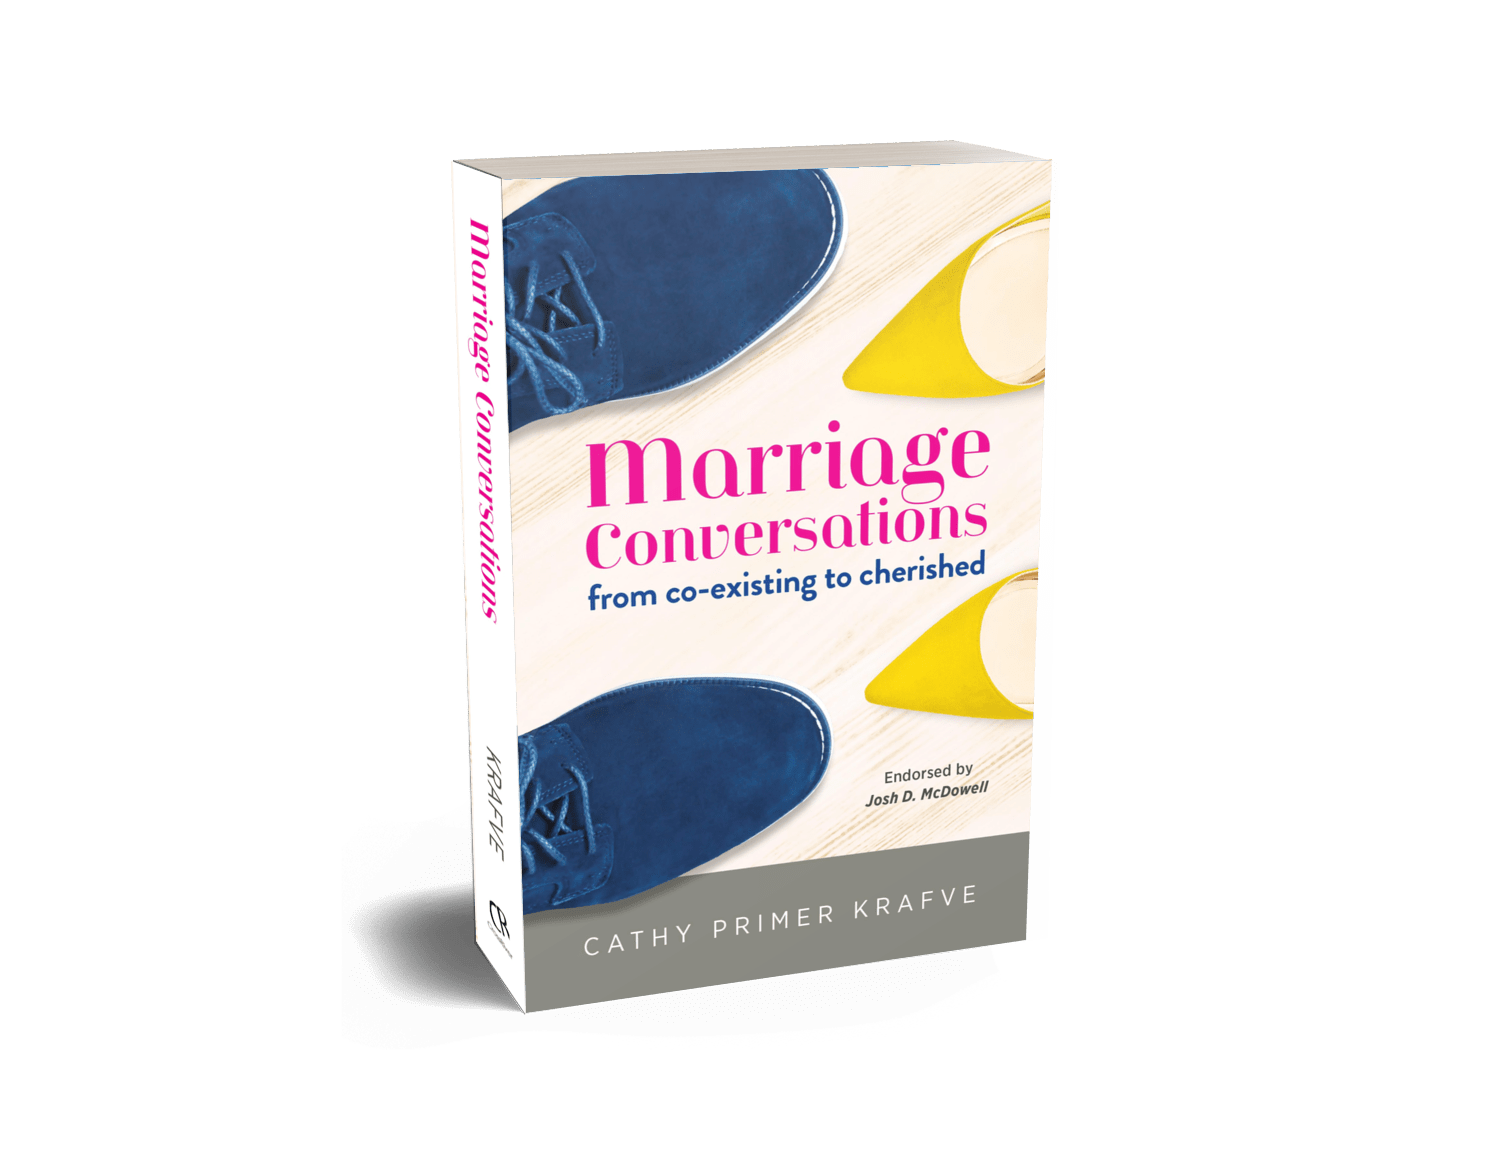 Marriage Conversations - Christian nonfiction book by Cathy Primer Krafve from Christian book publisher CrossRiver Media Group